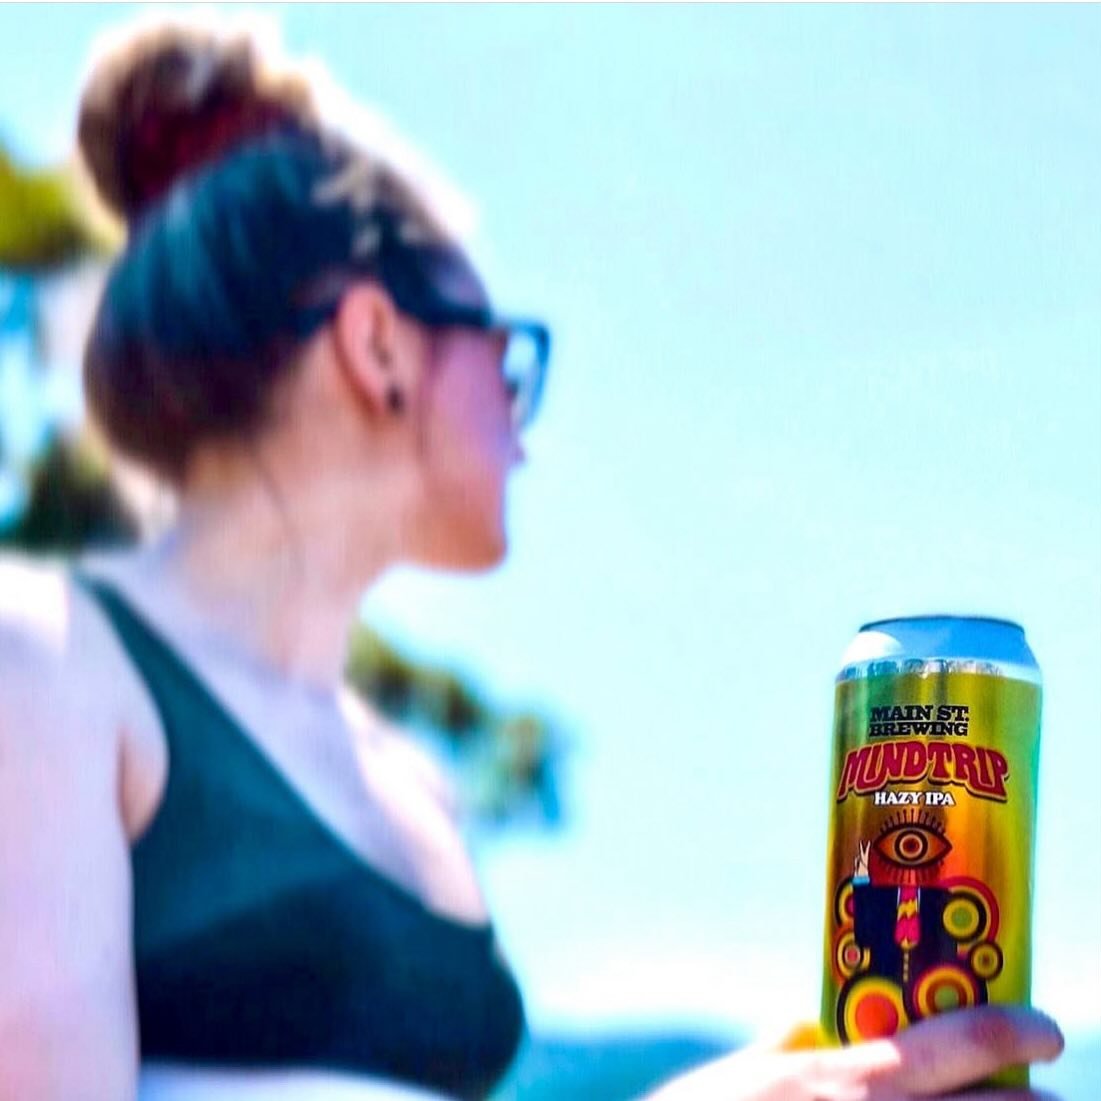 TAKE A &rsquo;TRIP

BACK ON TAP: Our Mindtrip Hazy IPA &mdash; a rich juice bomb of a beer with flavours of pineapple and lychee. Aromatic. Intense. Unapologetically hazy.

6.2% ABV / 42 IBU

📸: @thathoppygirl 

#mainstreetbeer #beerstagram #bccraft